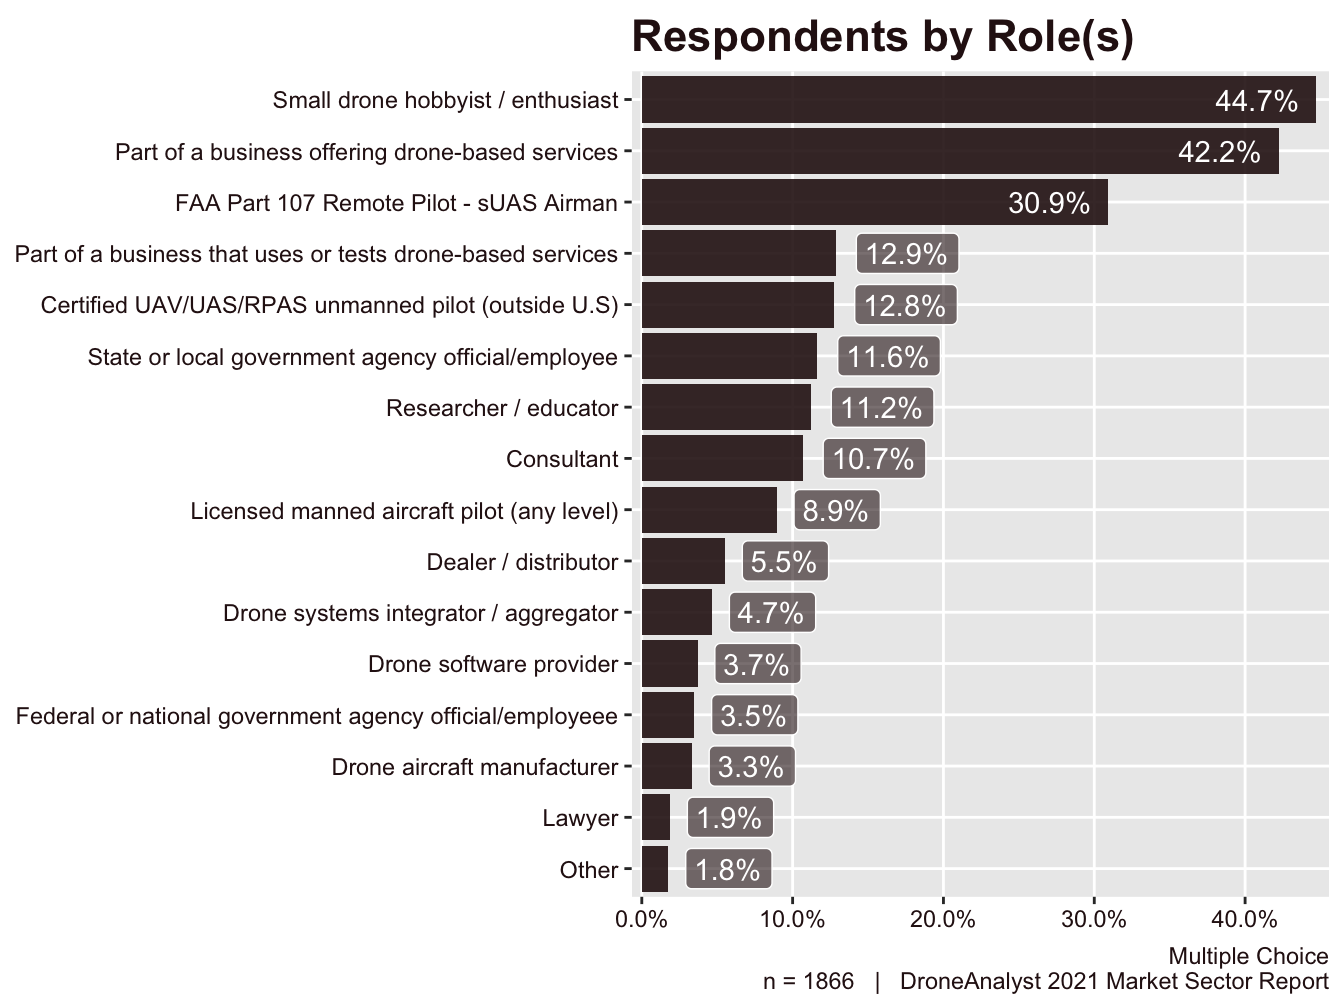 Respondent(s) by Role